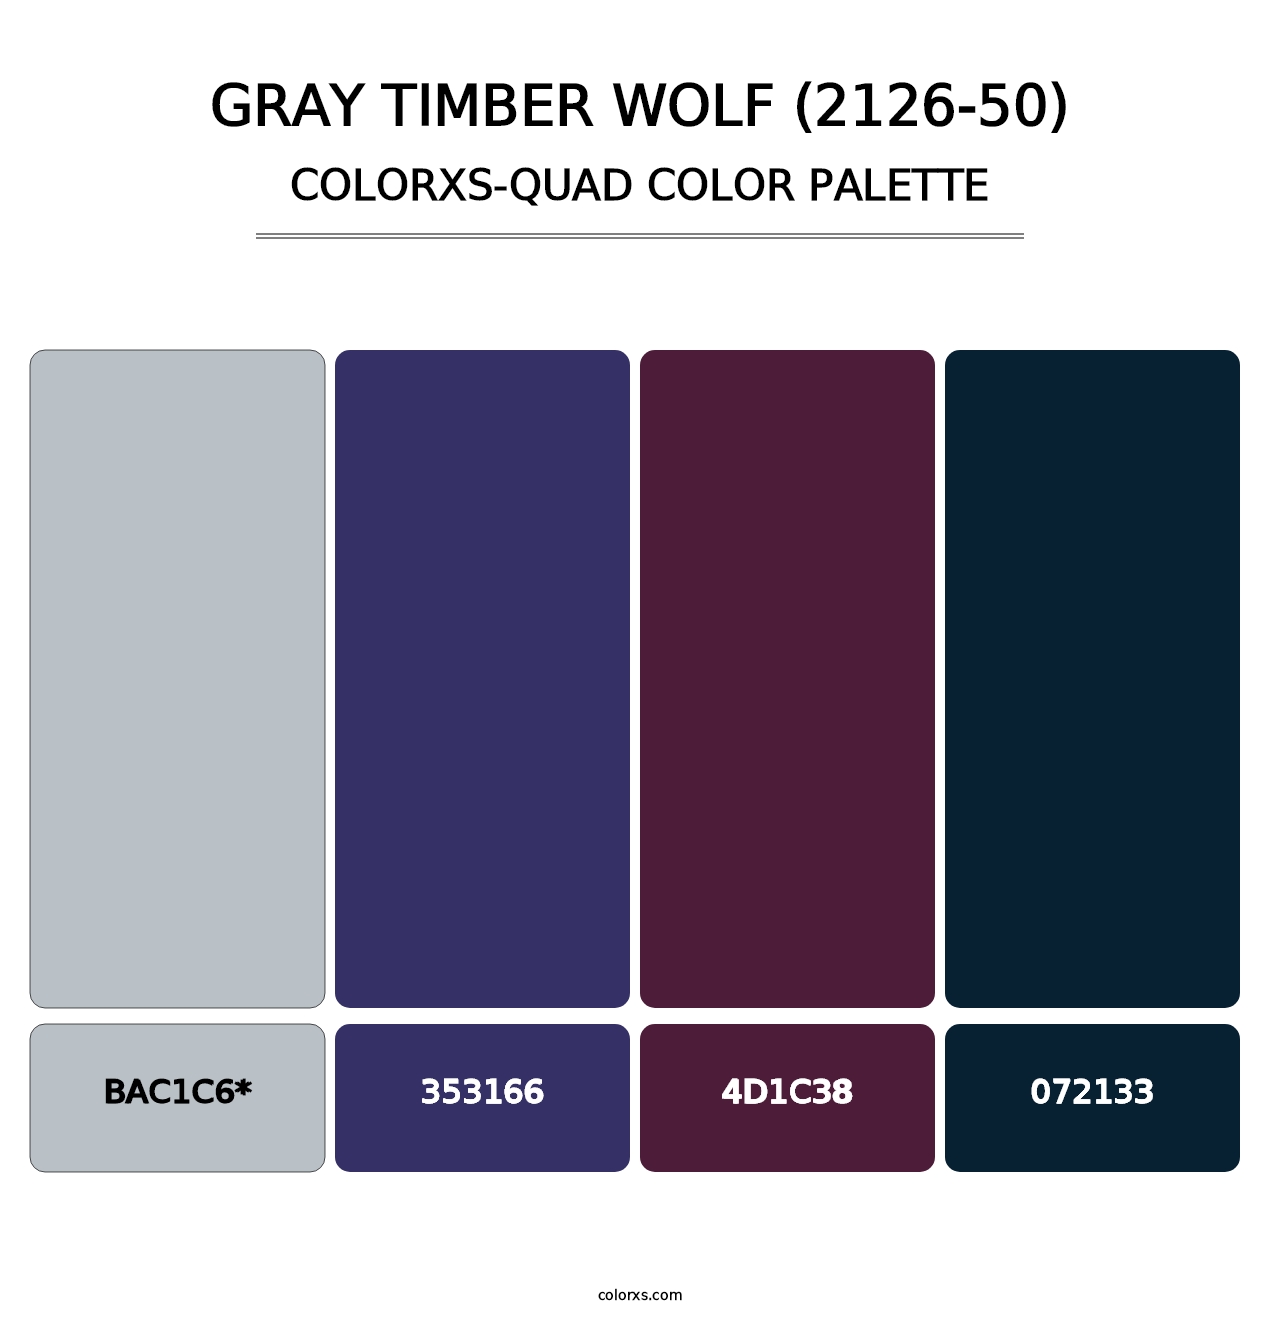 Gray Timber Wolf (2126-50) - Colorxs Quad Palette